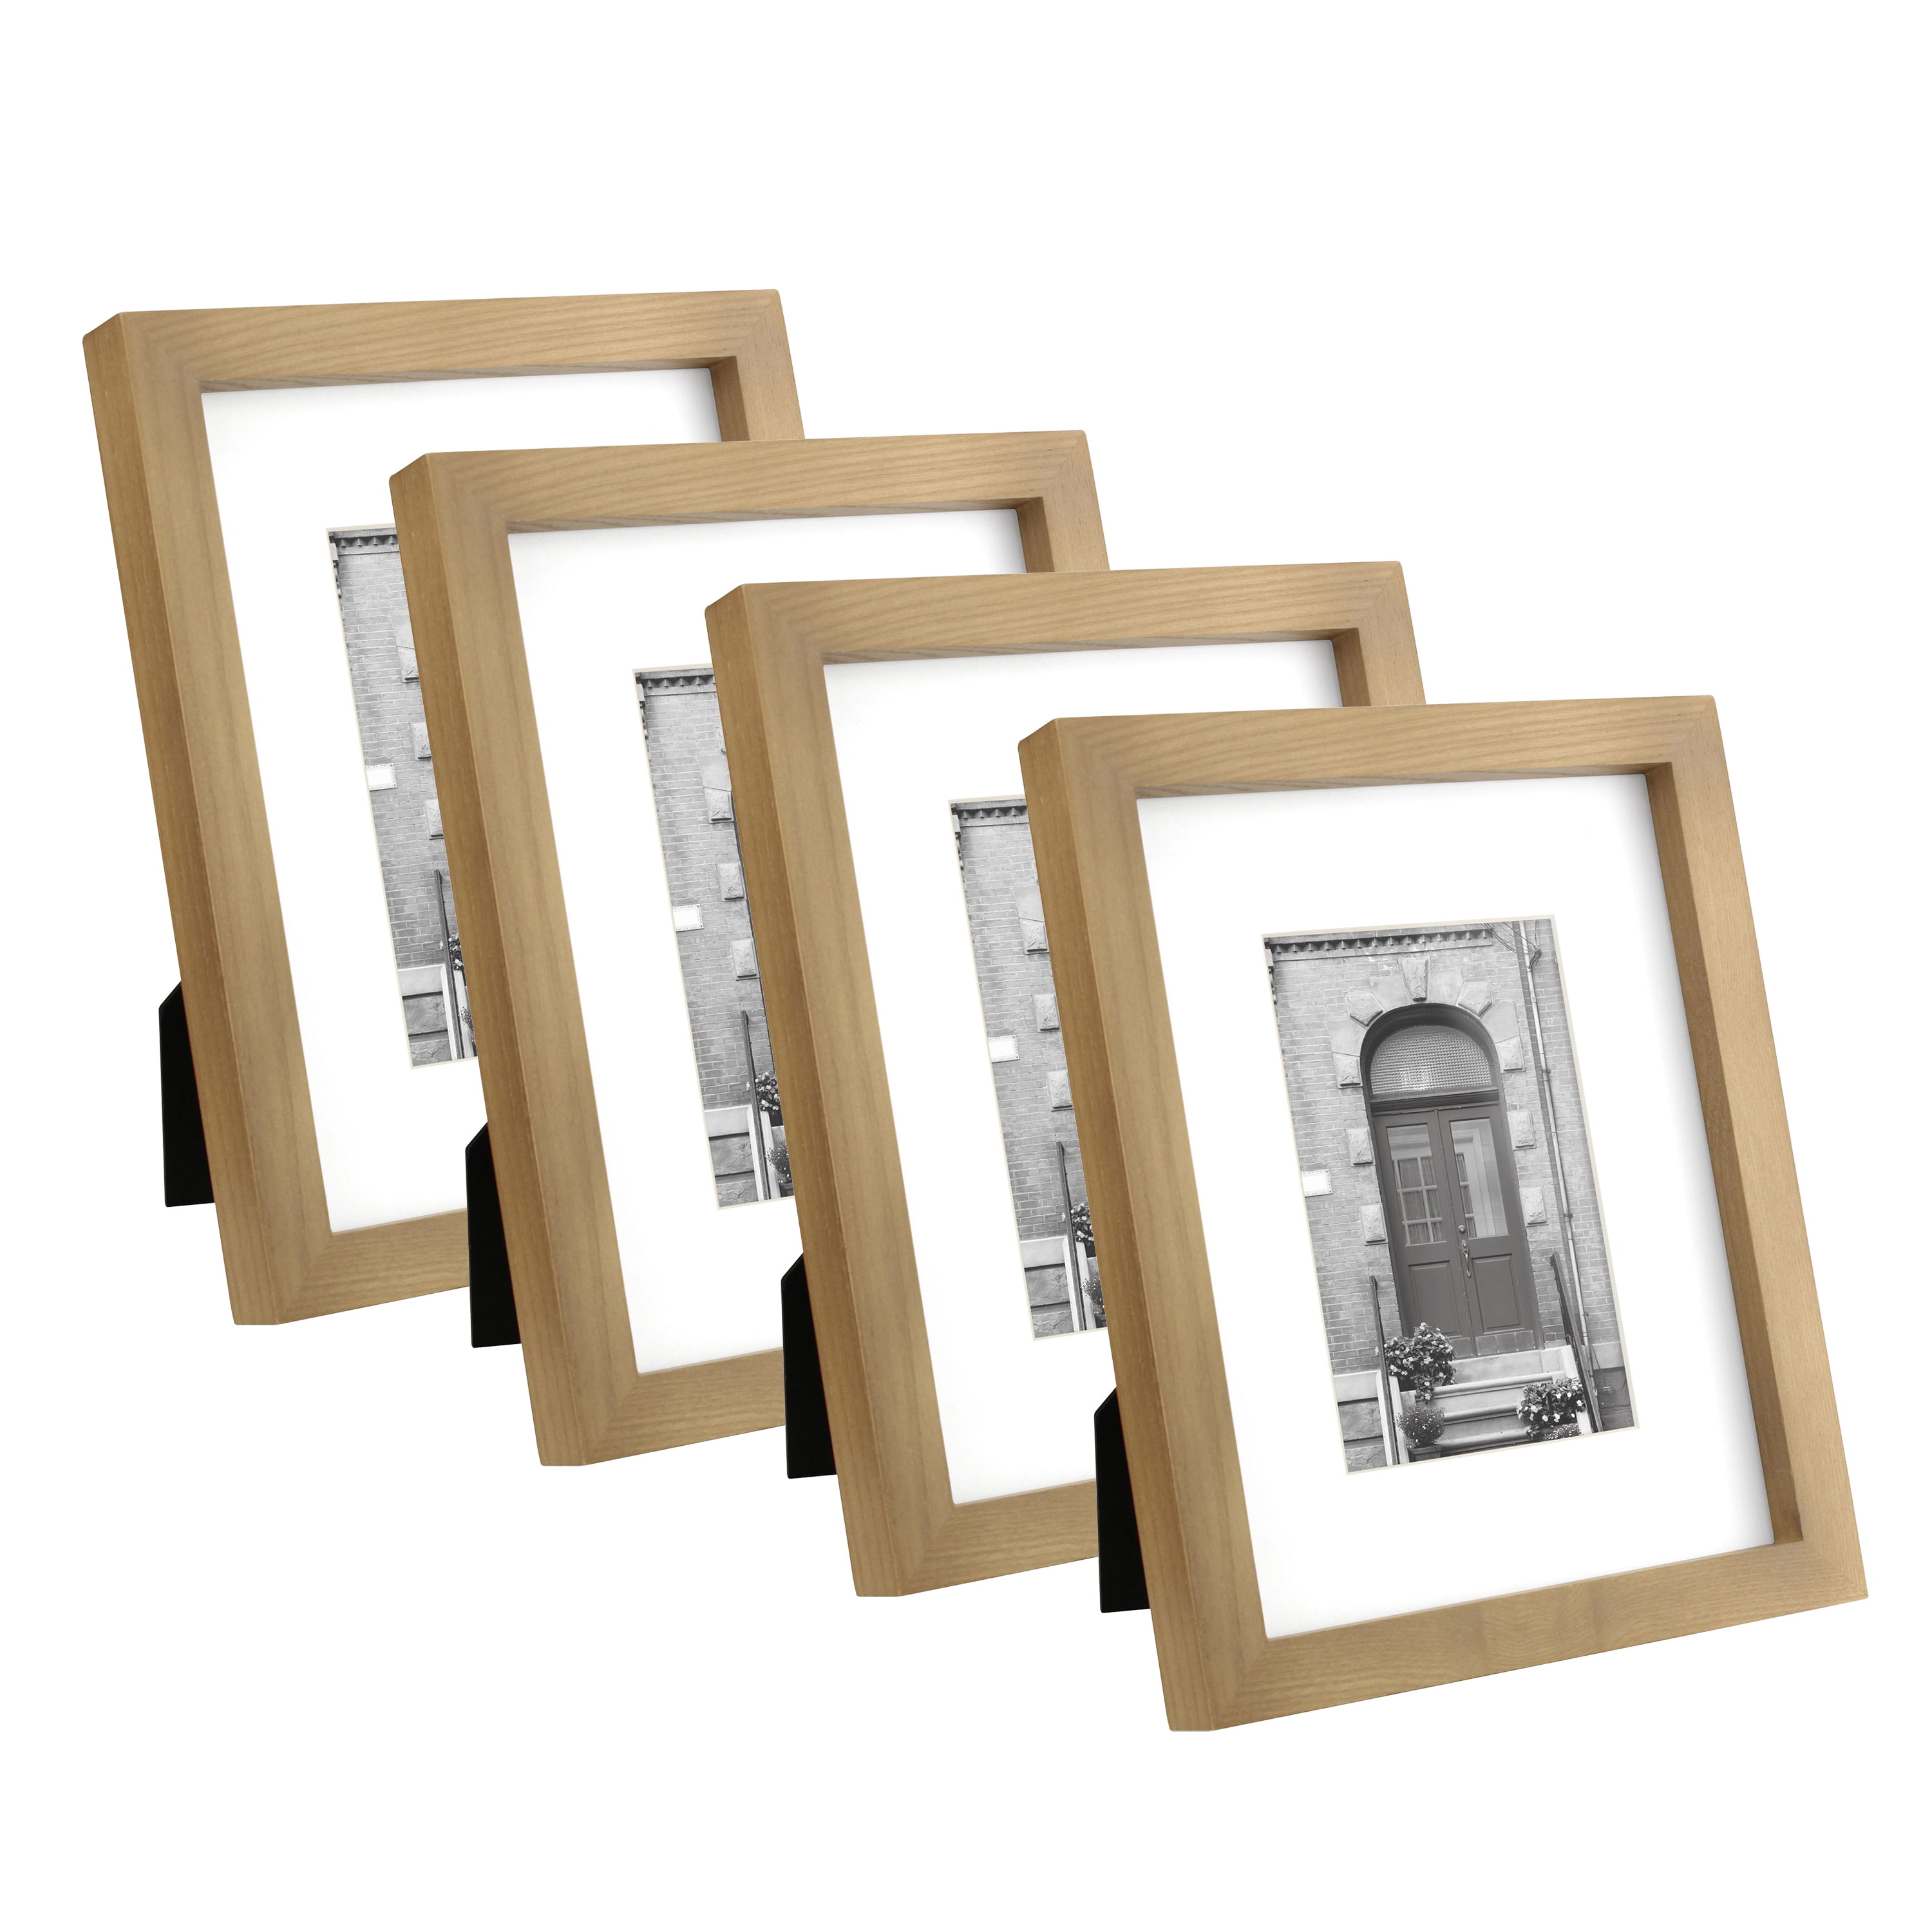 Giftgarden giftgarden Brown 4x6 Picture Frame Set of 4, 5x7 Frame Matted to  4x6 Photo Rustic Walnut Frames with Mat for Wall or Tabletop Di